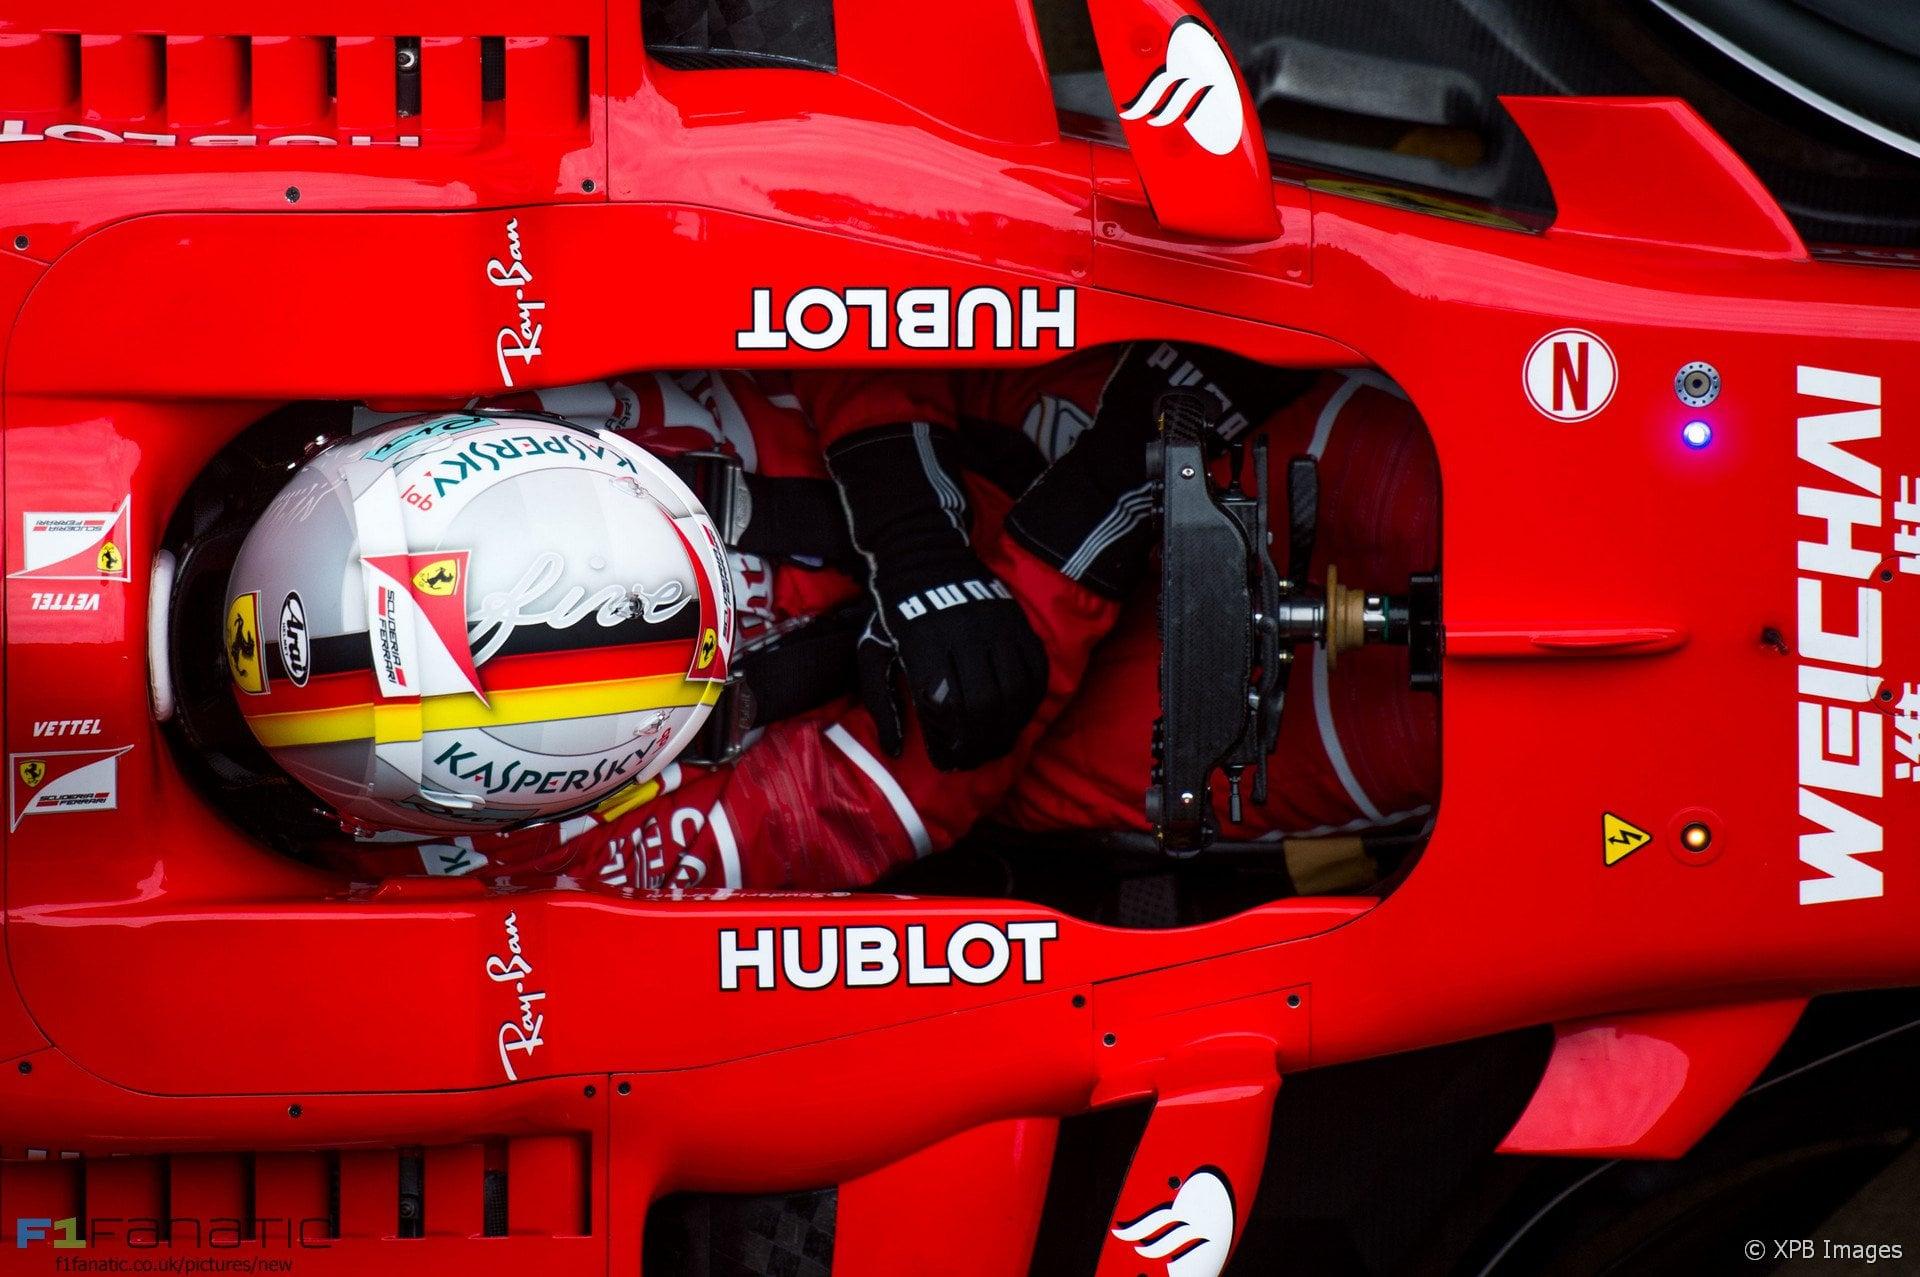 I Just Noticed In This Picture Of Vettel S Cockpit That The